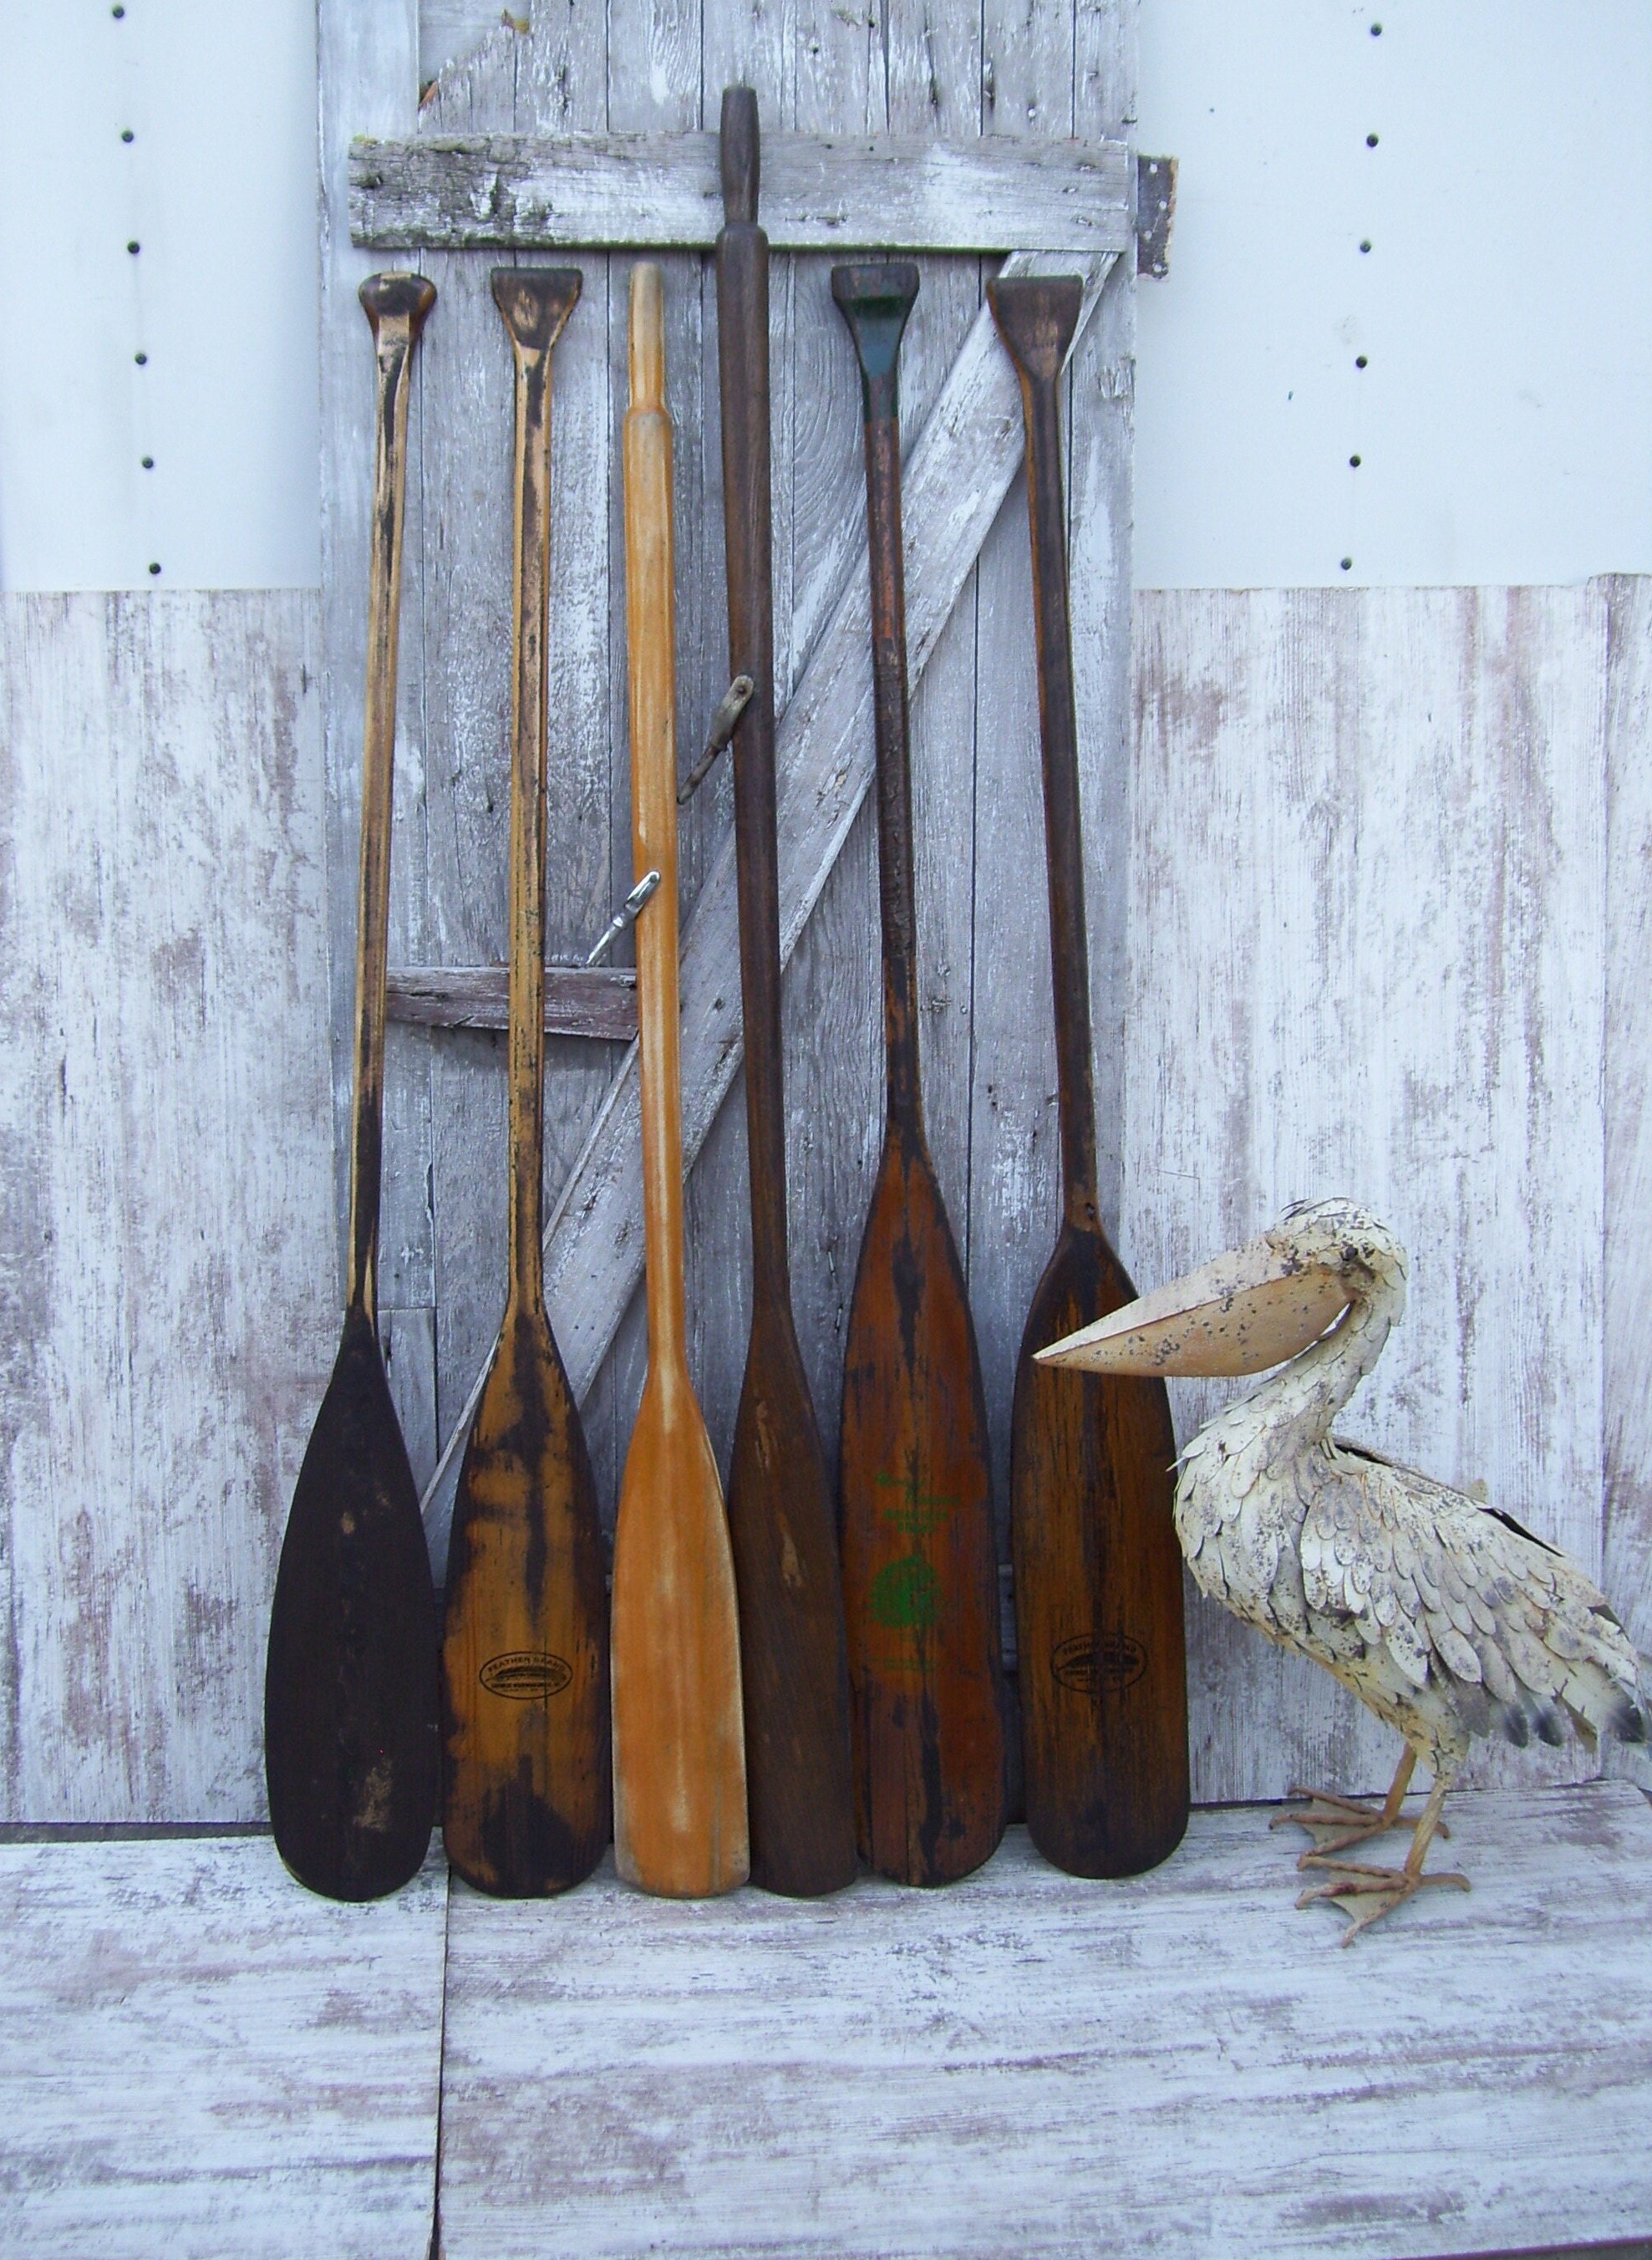 Vintage Wood Canoe Paddle Feather Brand Navajo Smokers Brand J & B Wooden  Paddle Boat Oar YOUR PICK Beach Lakehouse Cabin 4 